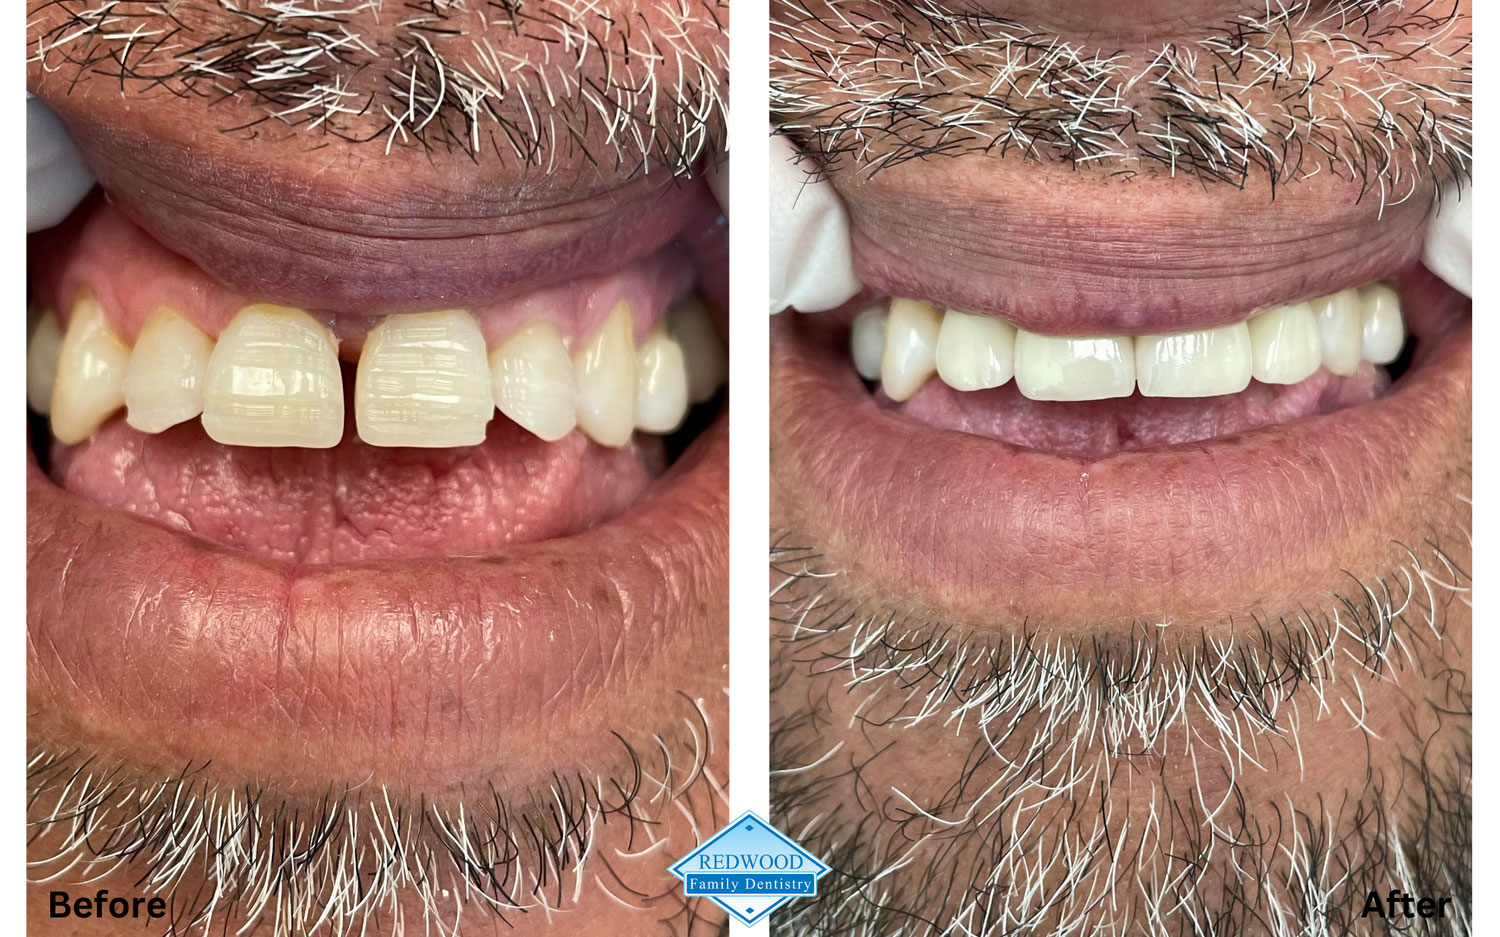 Redwood Family Dentistry patient before & after